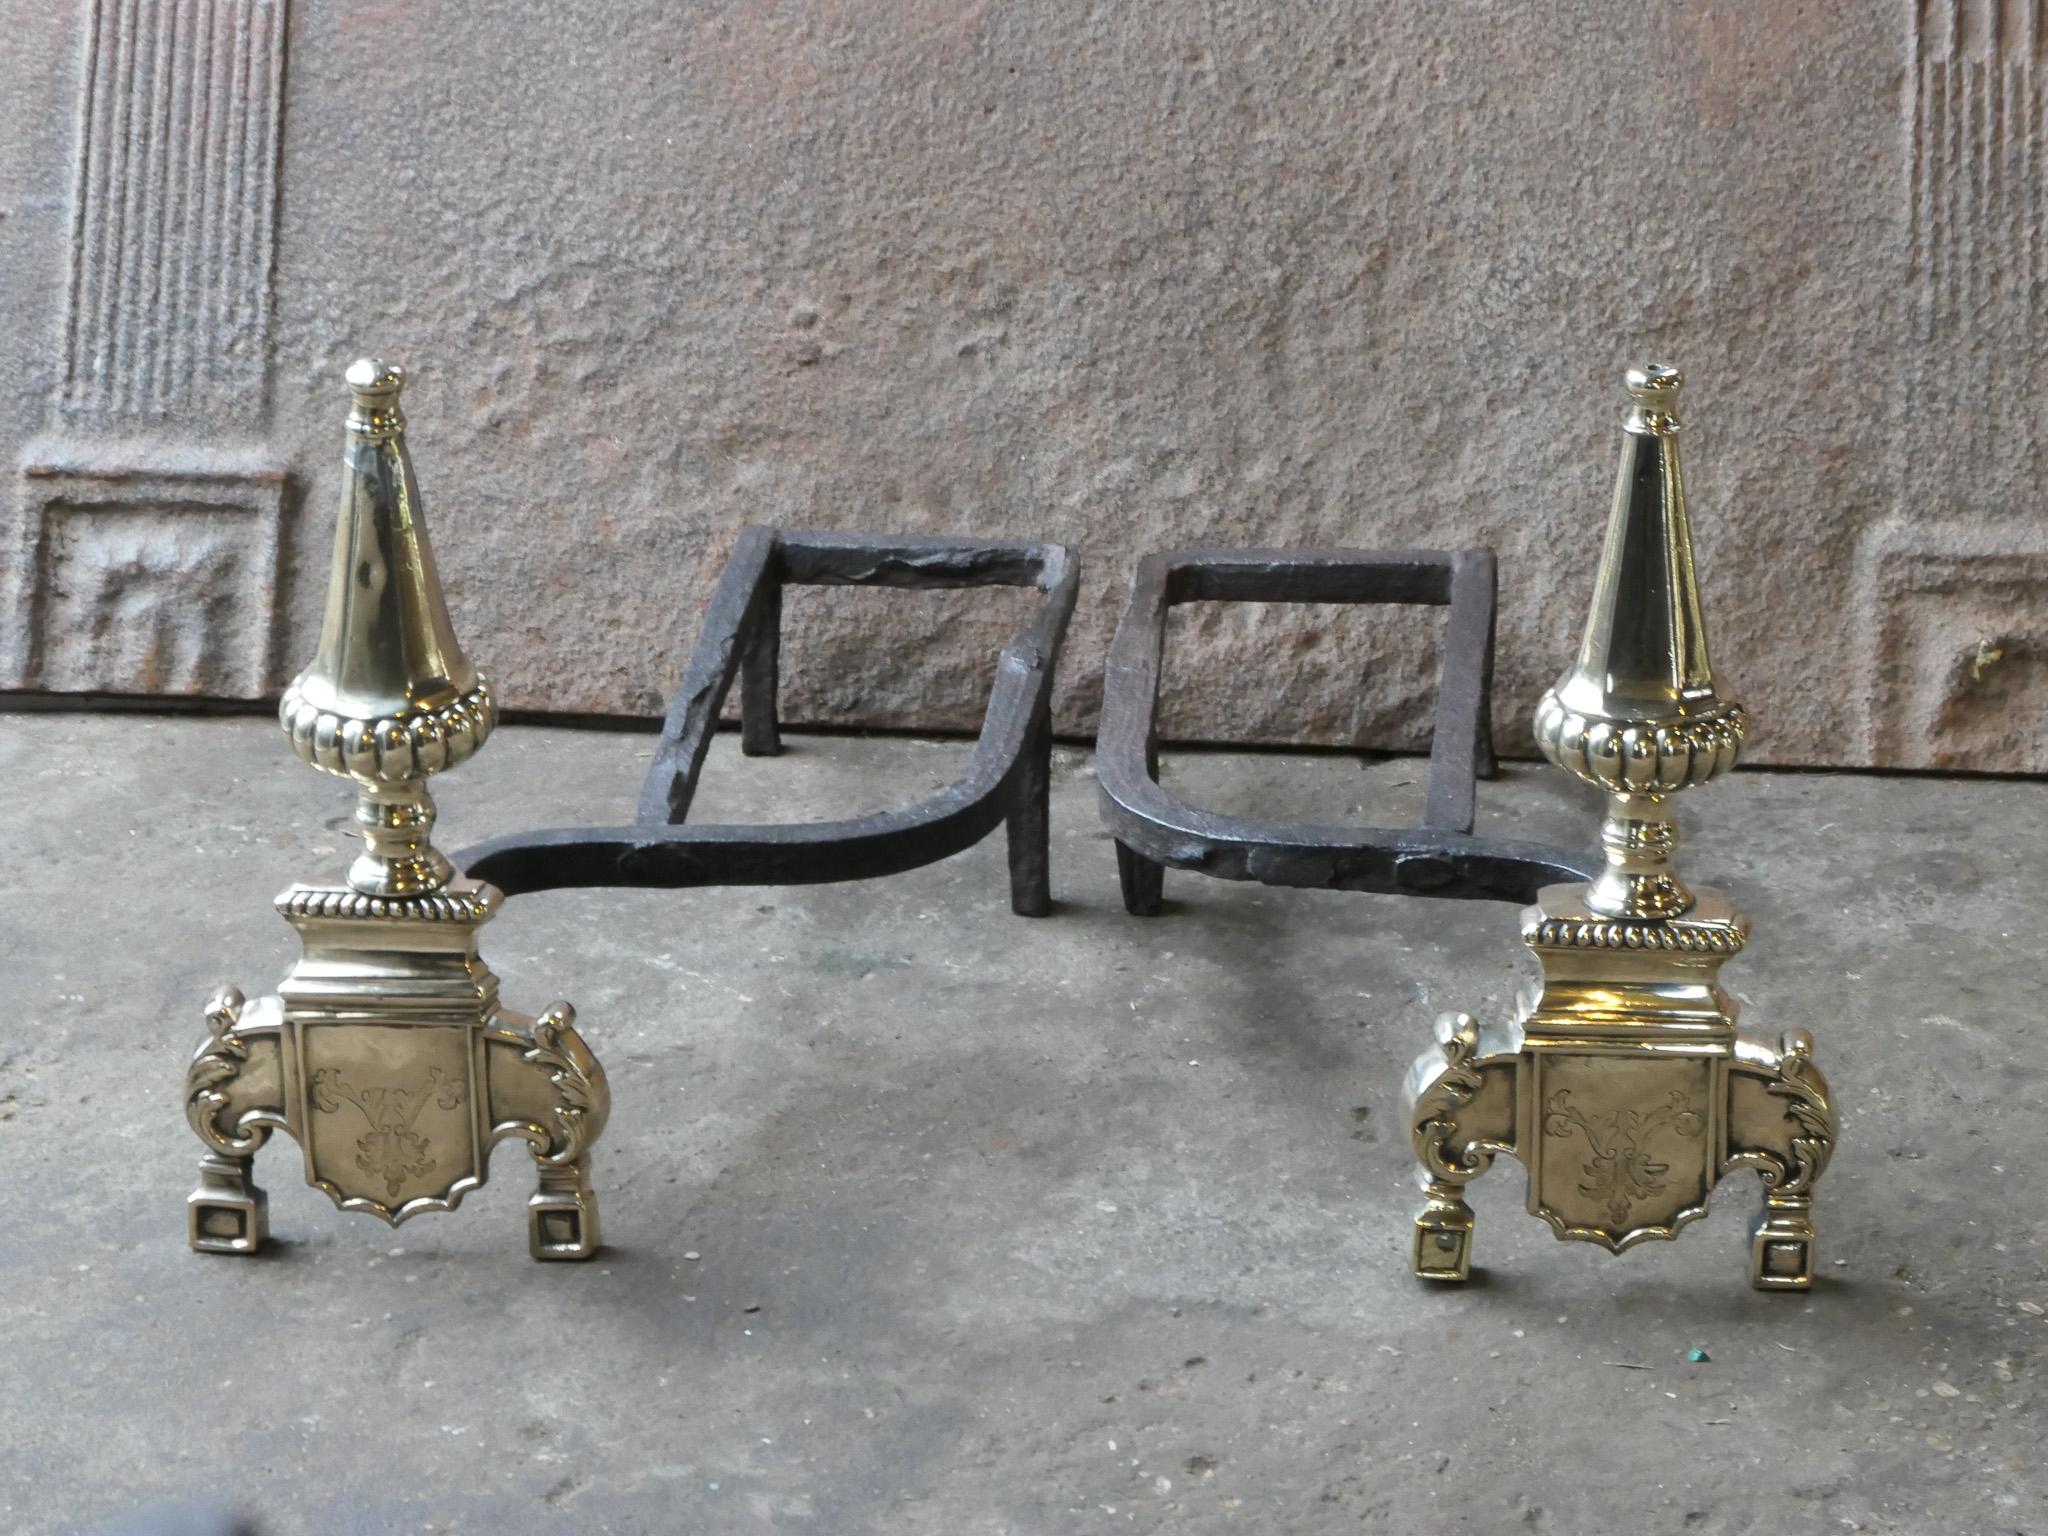 17th century French Louis XIV style andirons made of bronze and wrought iron. The condition is good. The andirons are fit for use in the fireplace.







